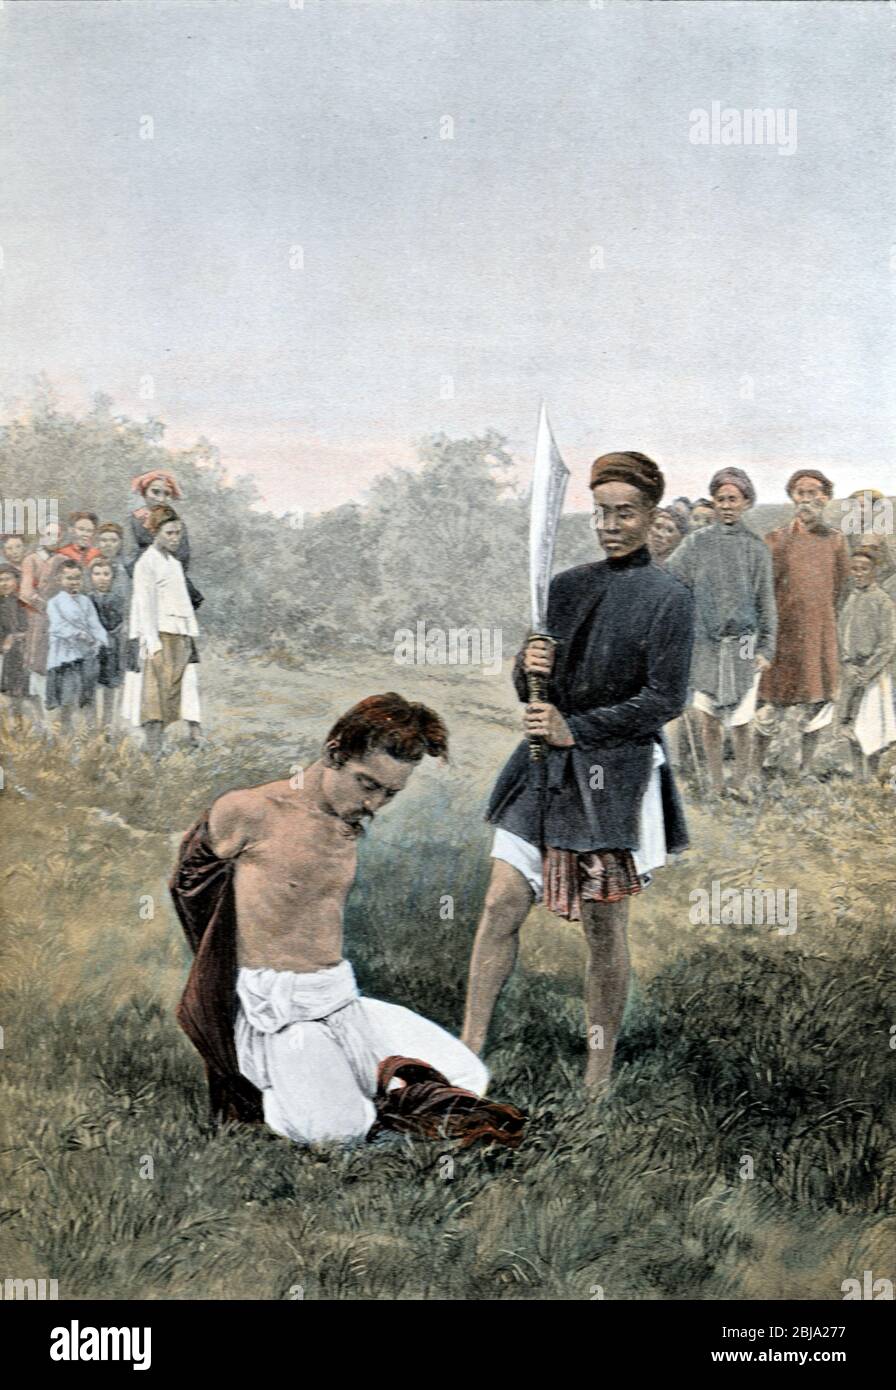 Beheading or Execution of a Prisoner in Vietnam c1890 Stock Photo